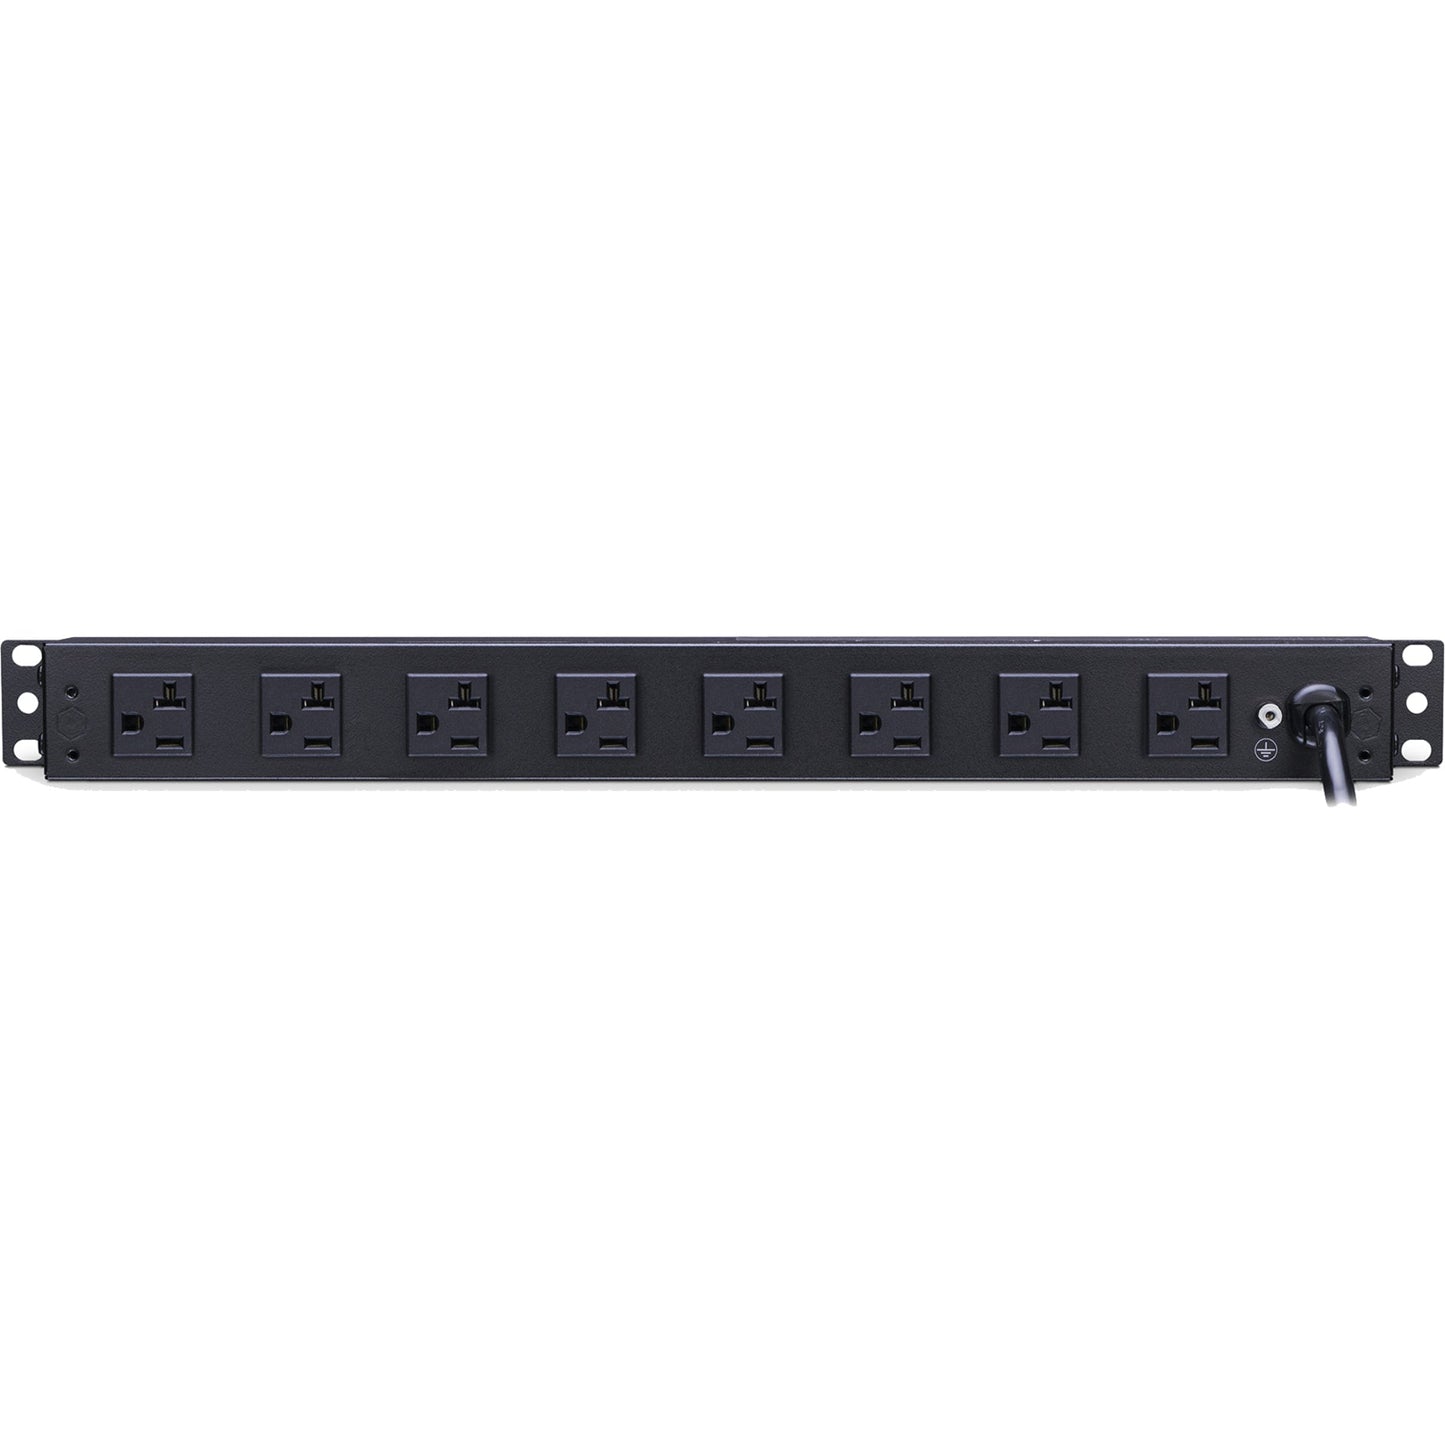 CyberPower RKBS20ST4F8R Rackbar 12 - Outlet Surge with 1800 J